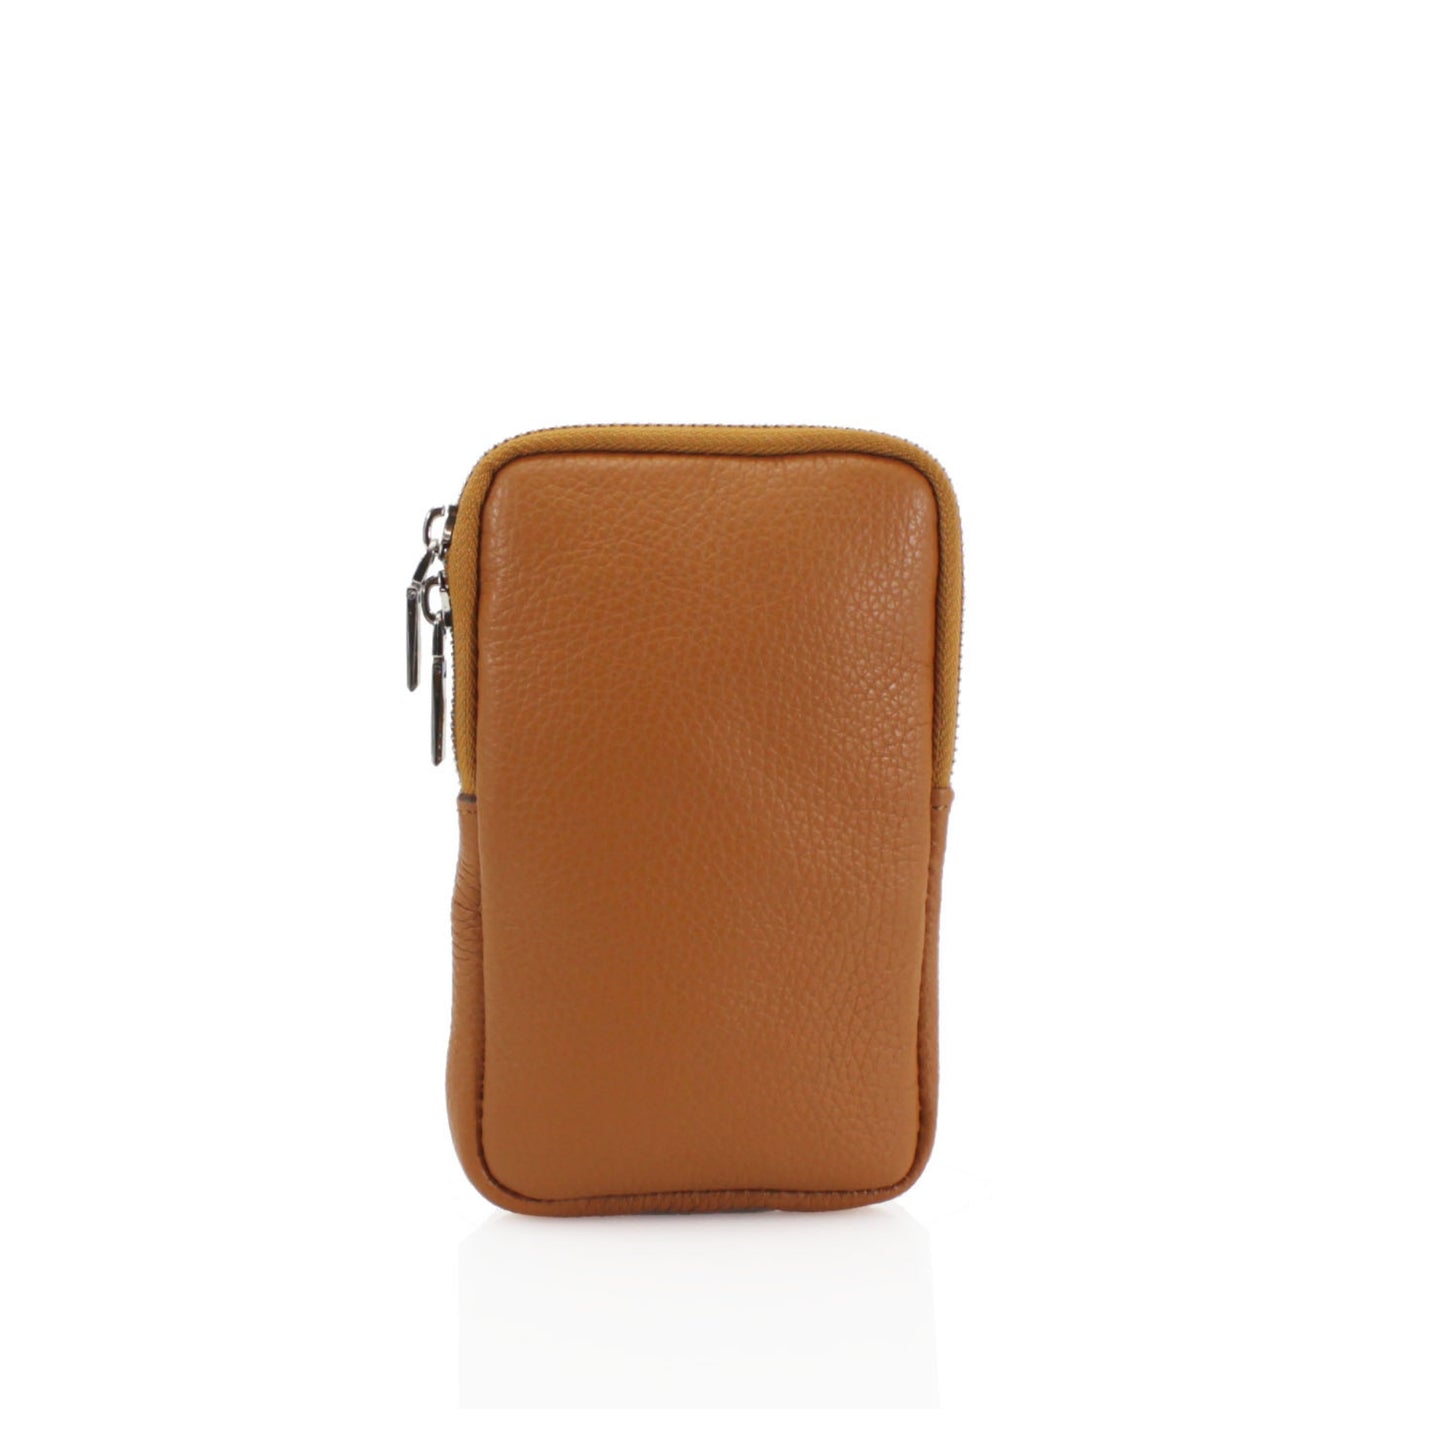 Phone crossbody pouch - Genuine leather